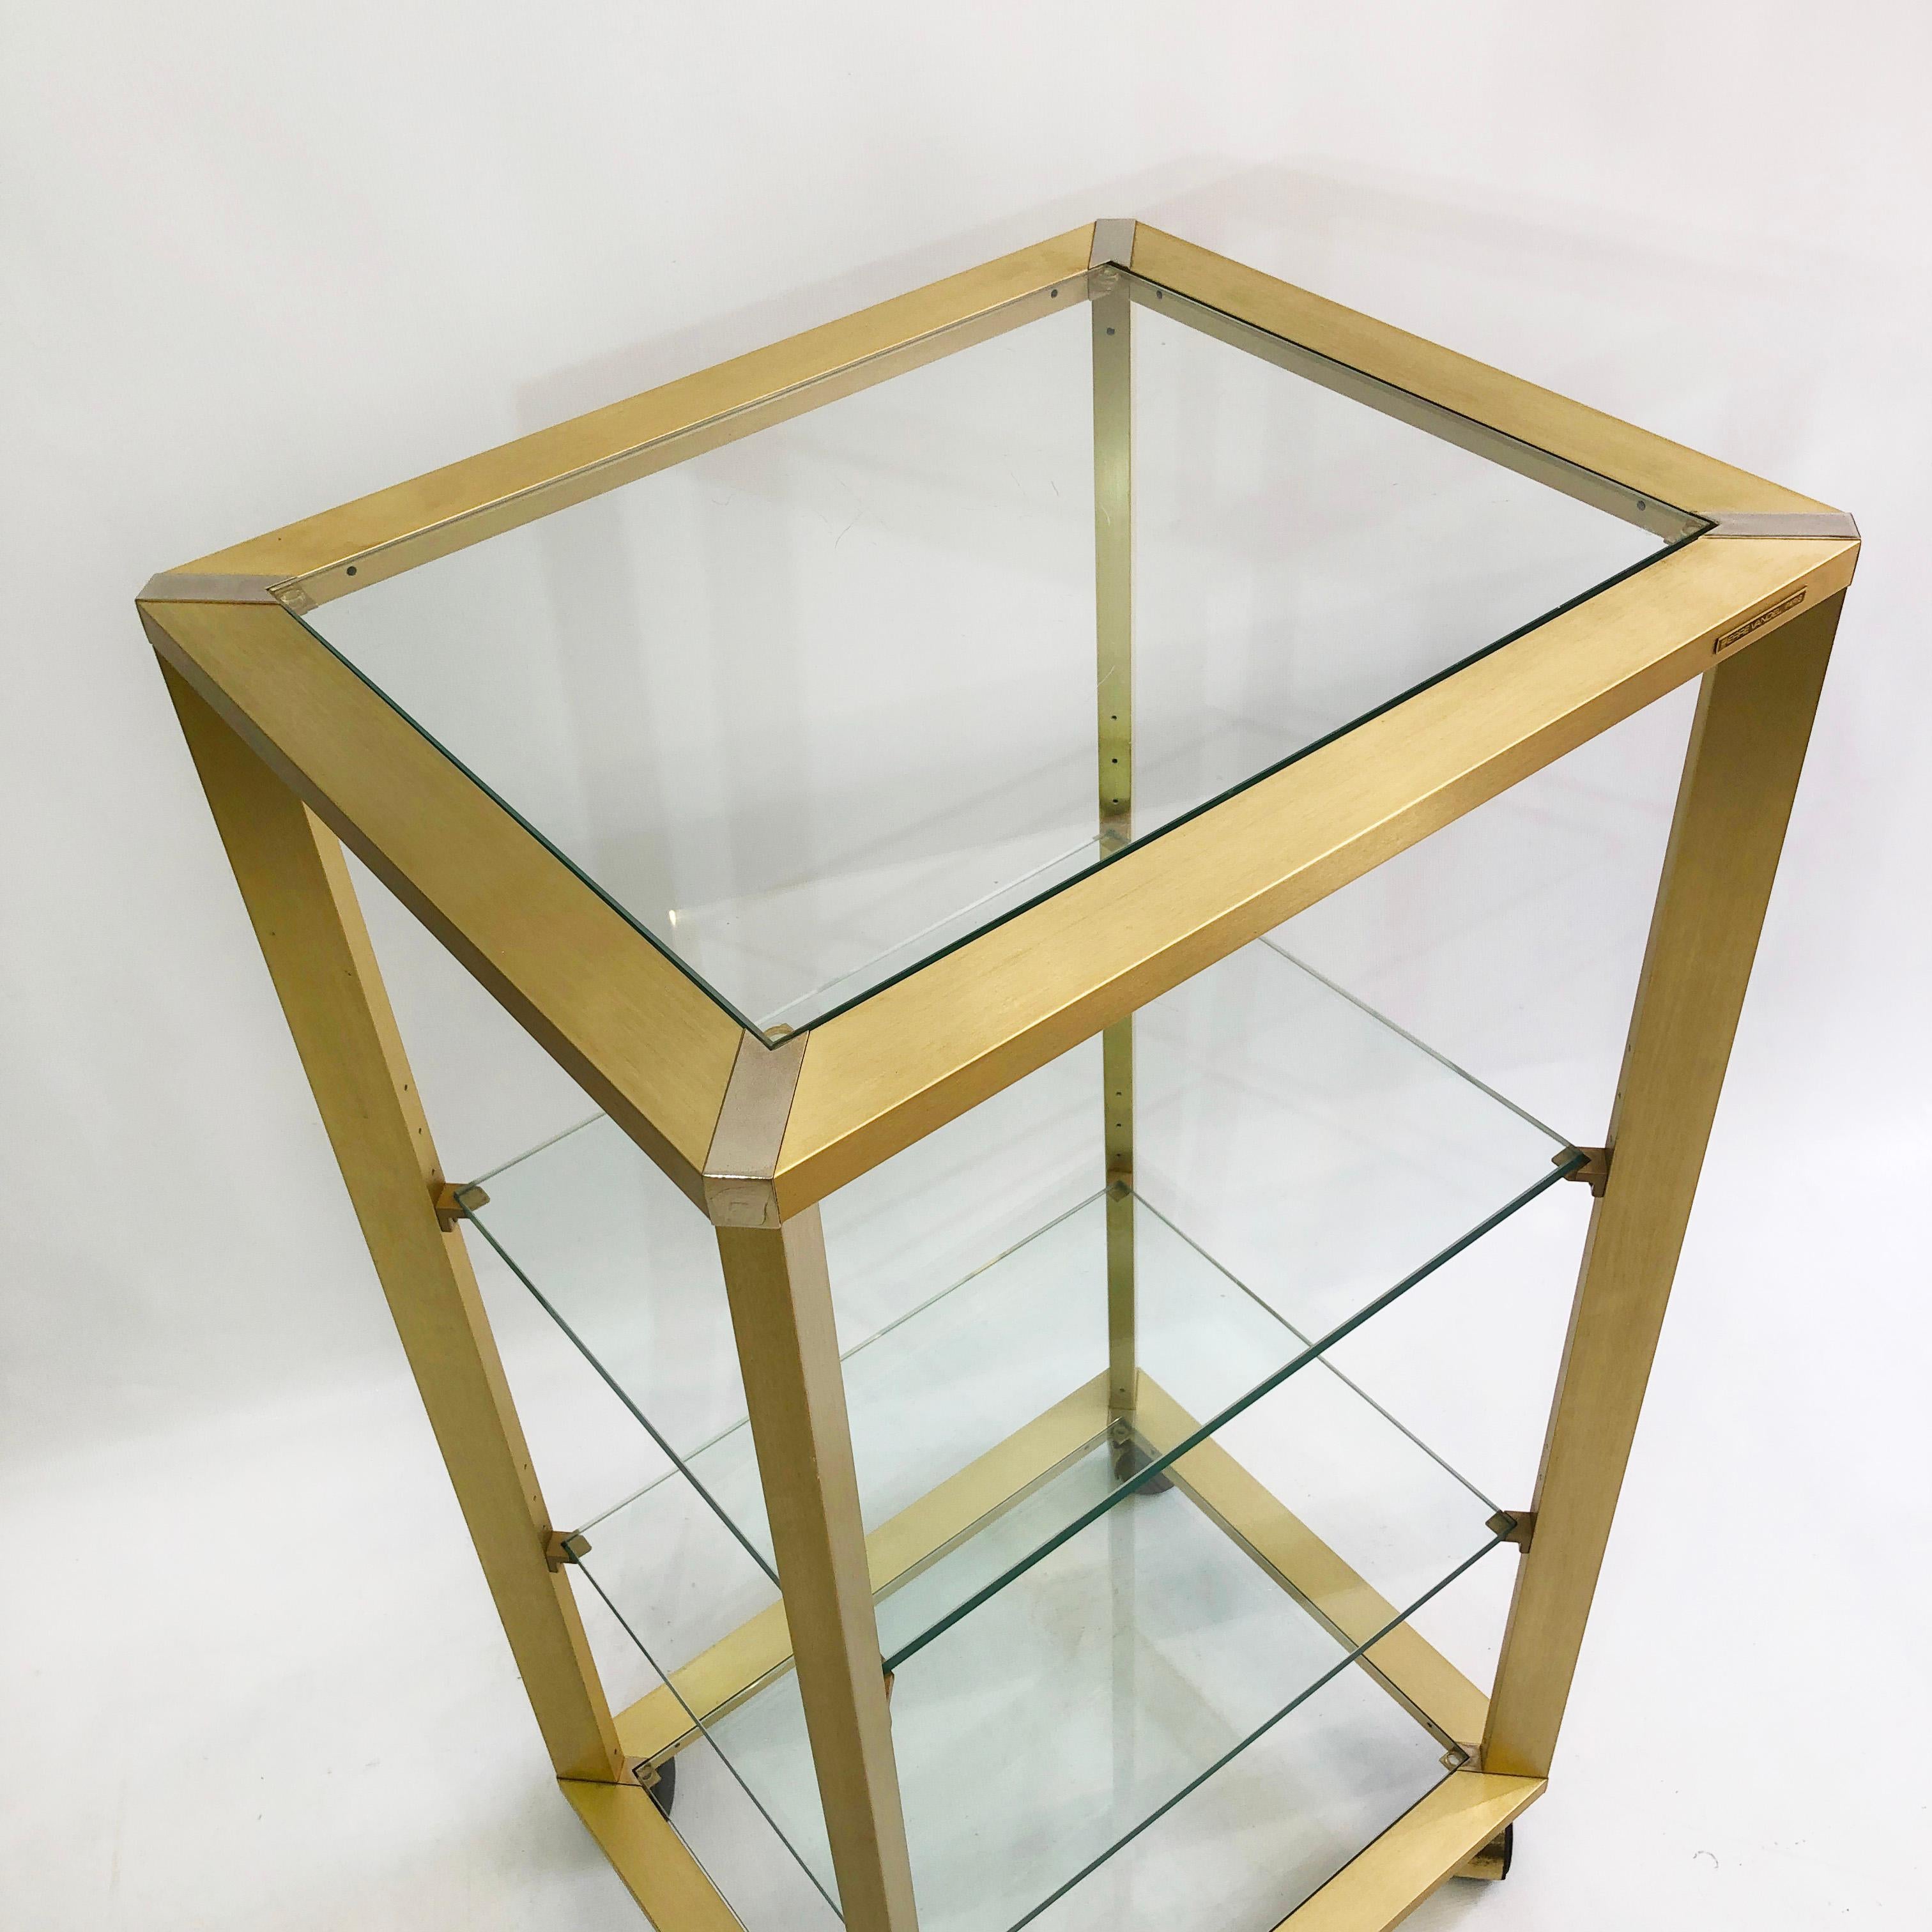 Late 20th Century Pierre Vandel Gold Brass Glass Etagere on Wheels 1970s Drinks Trolley Shelving For Sale